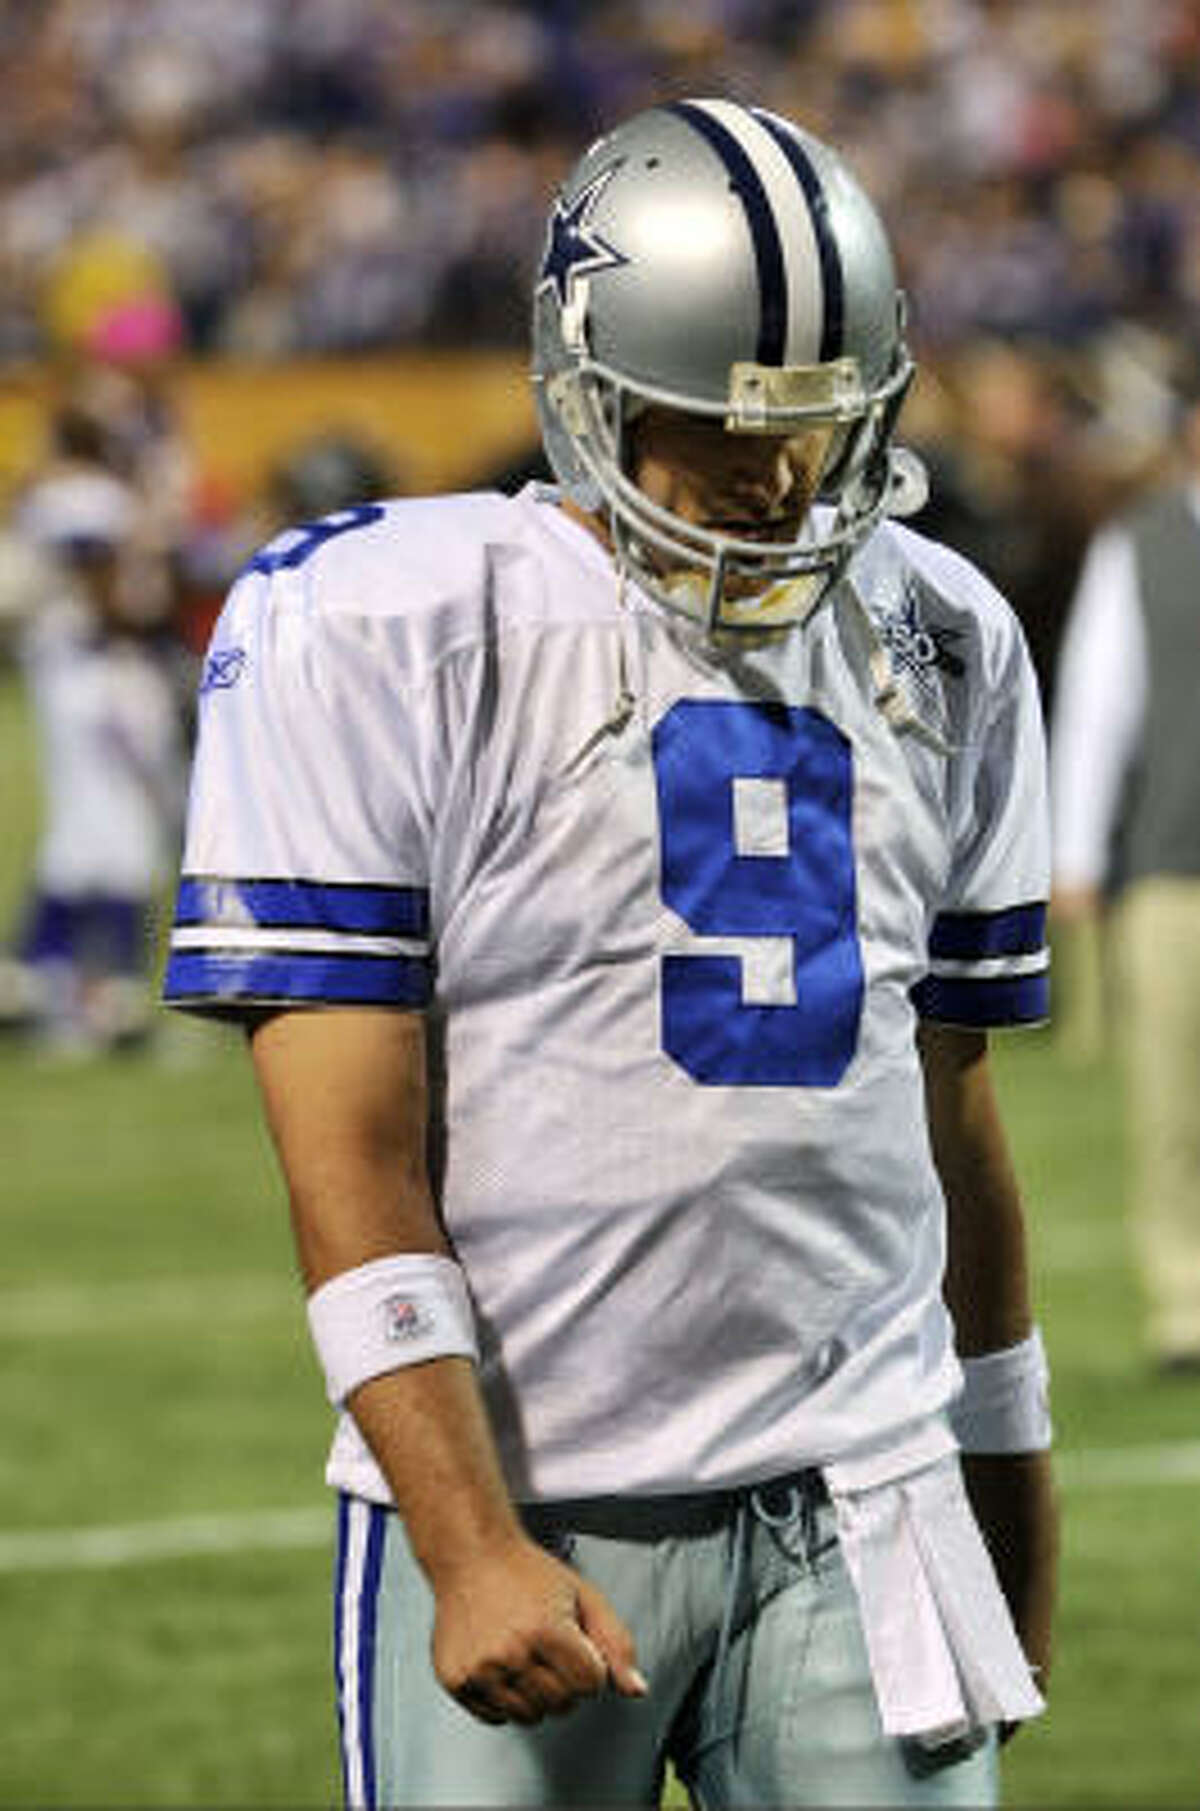 Sports Illustrated released an NFL player’s poll that ranked Tony Romo as the league’s second-most overrated player.